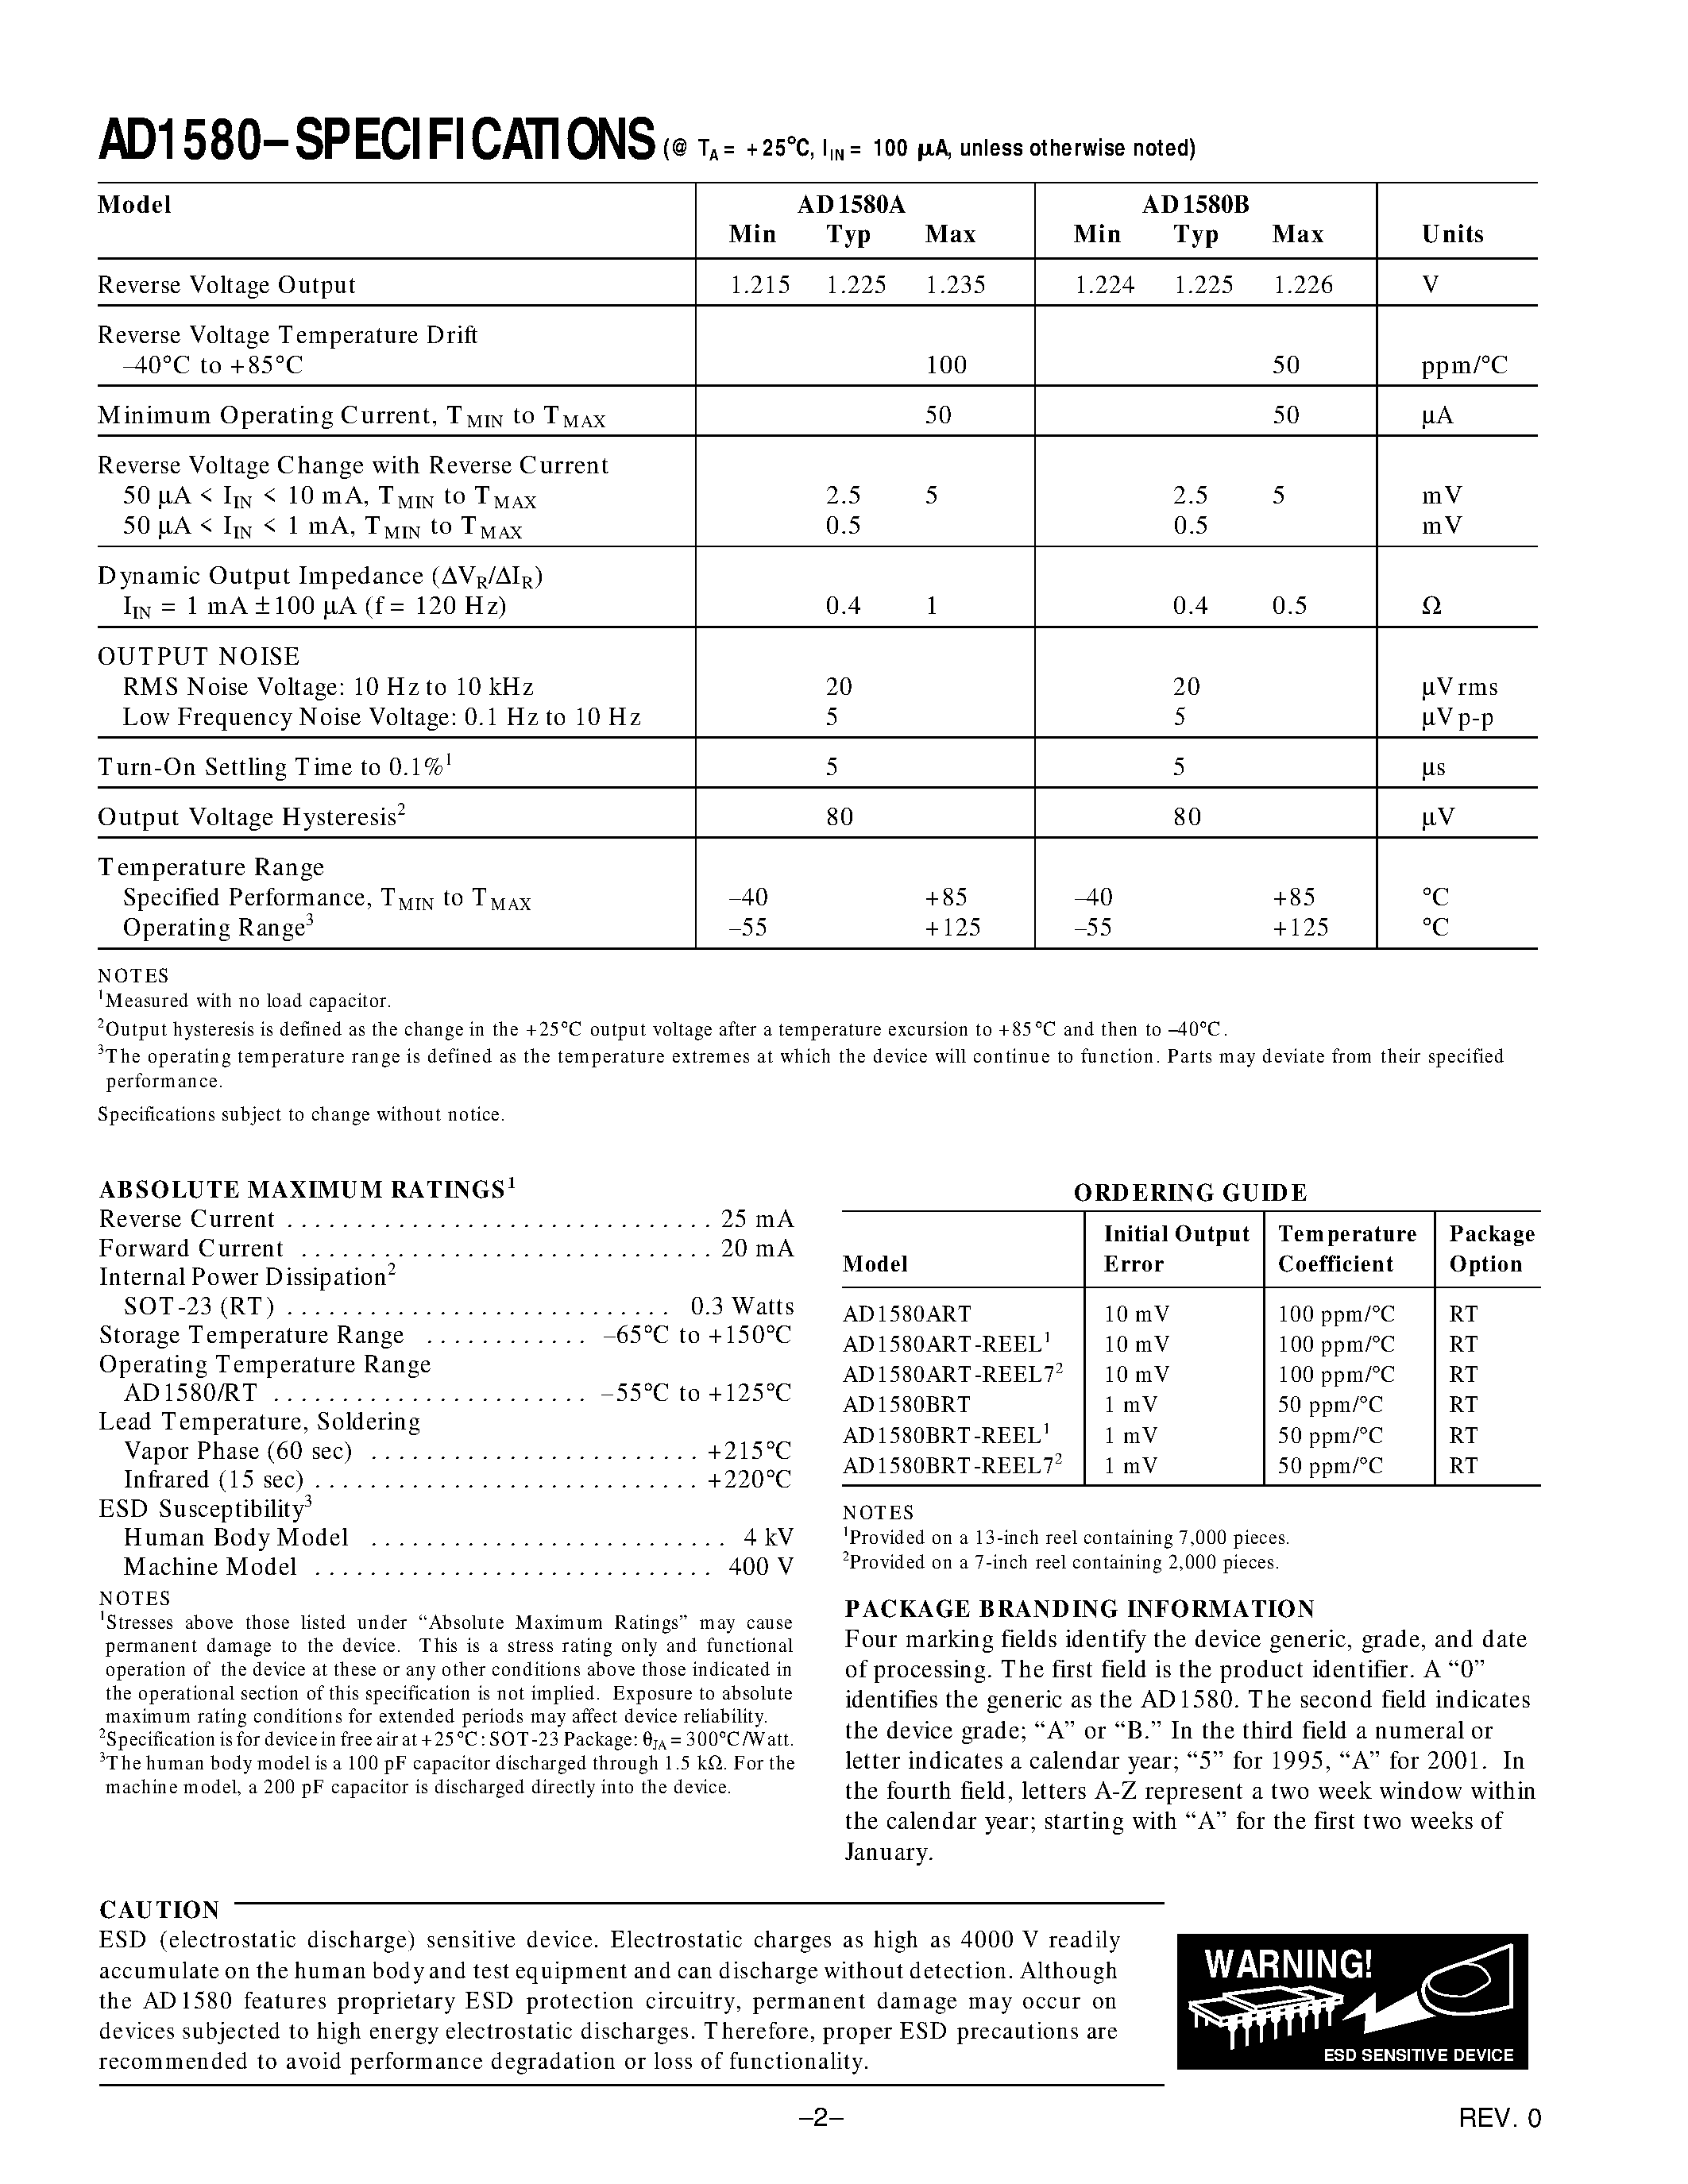 Datasheet AD1580ART-REEL7 - 1.2 V Micropower/ Precision Shunt Voltage Reference page 2